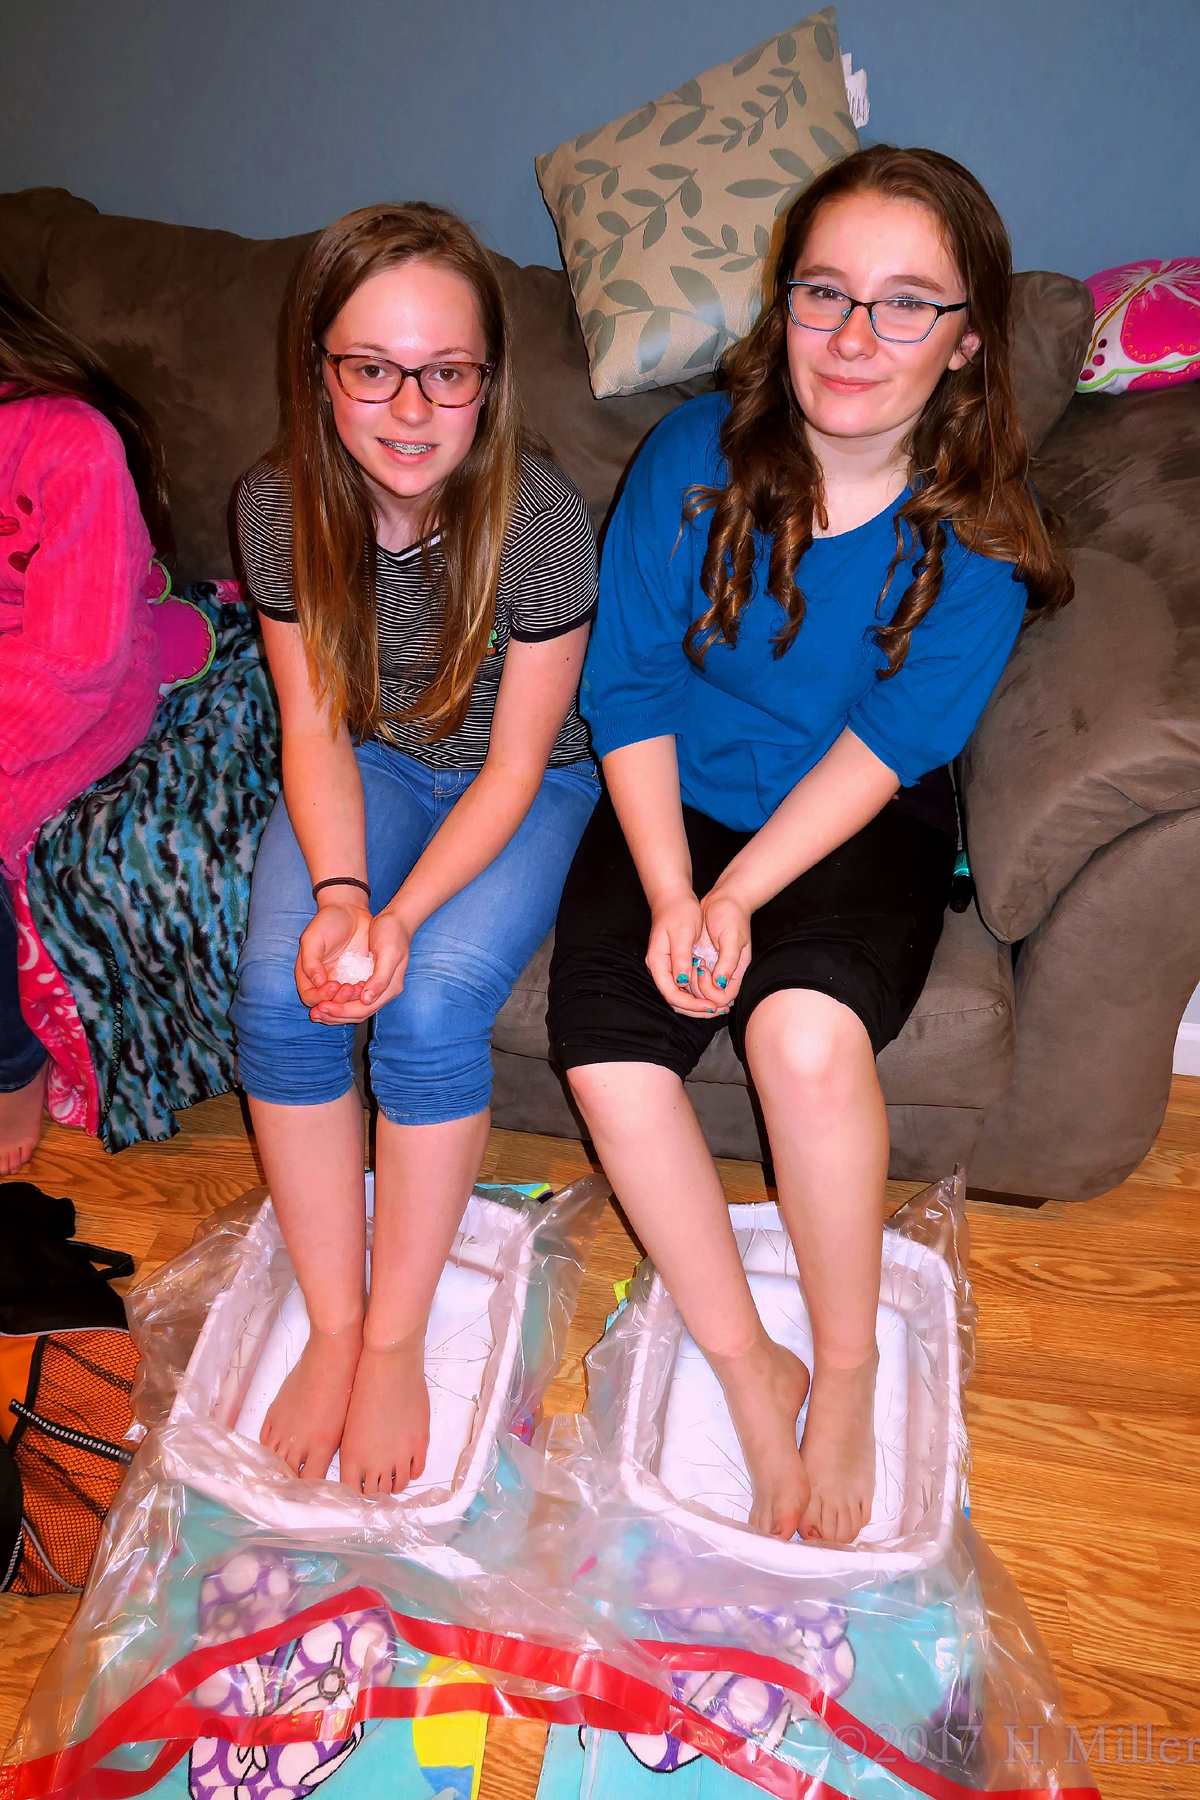 Spa Party Kids Pedicure Session Begins! They Are About To Add The Salt To Their Footbaths. 